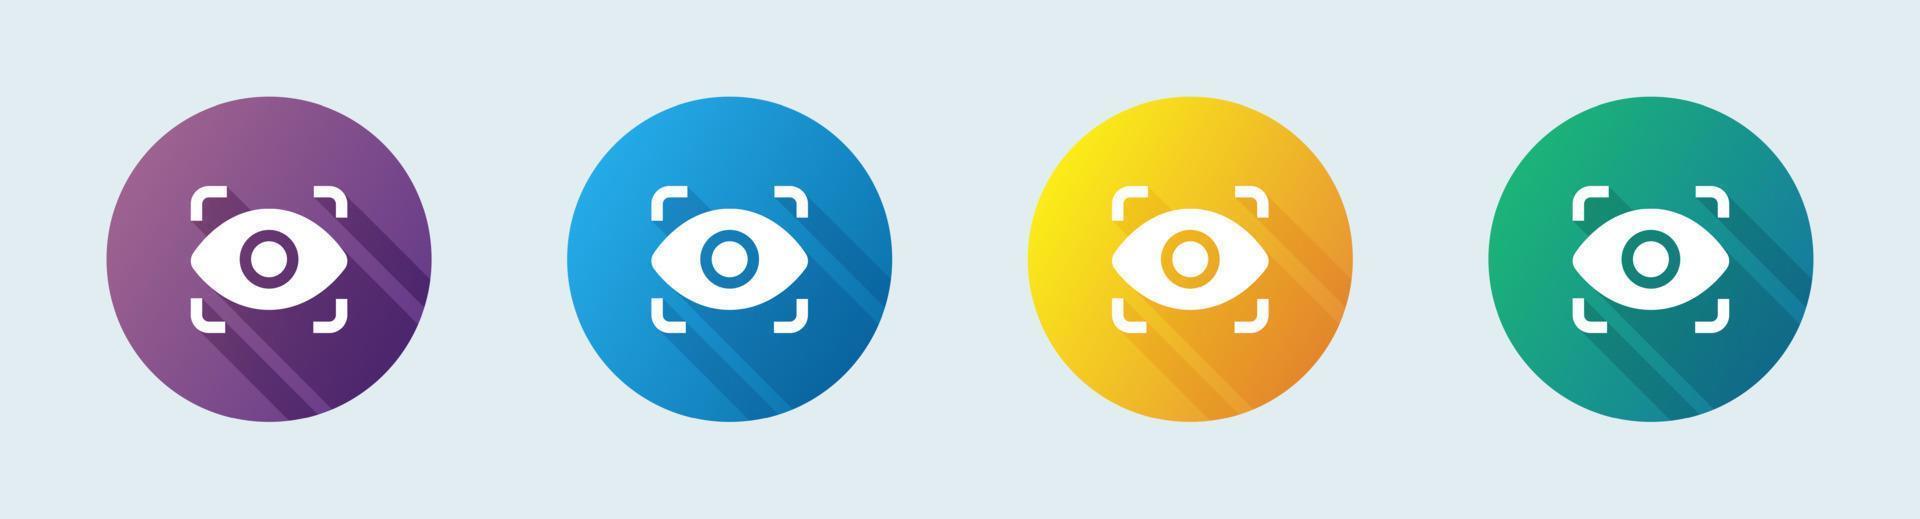 View solid icon in flat design style. Eye signs vector illustration.